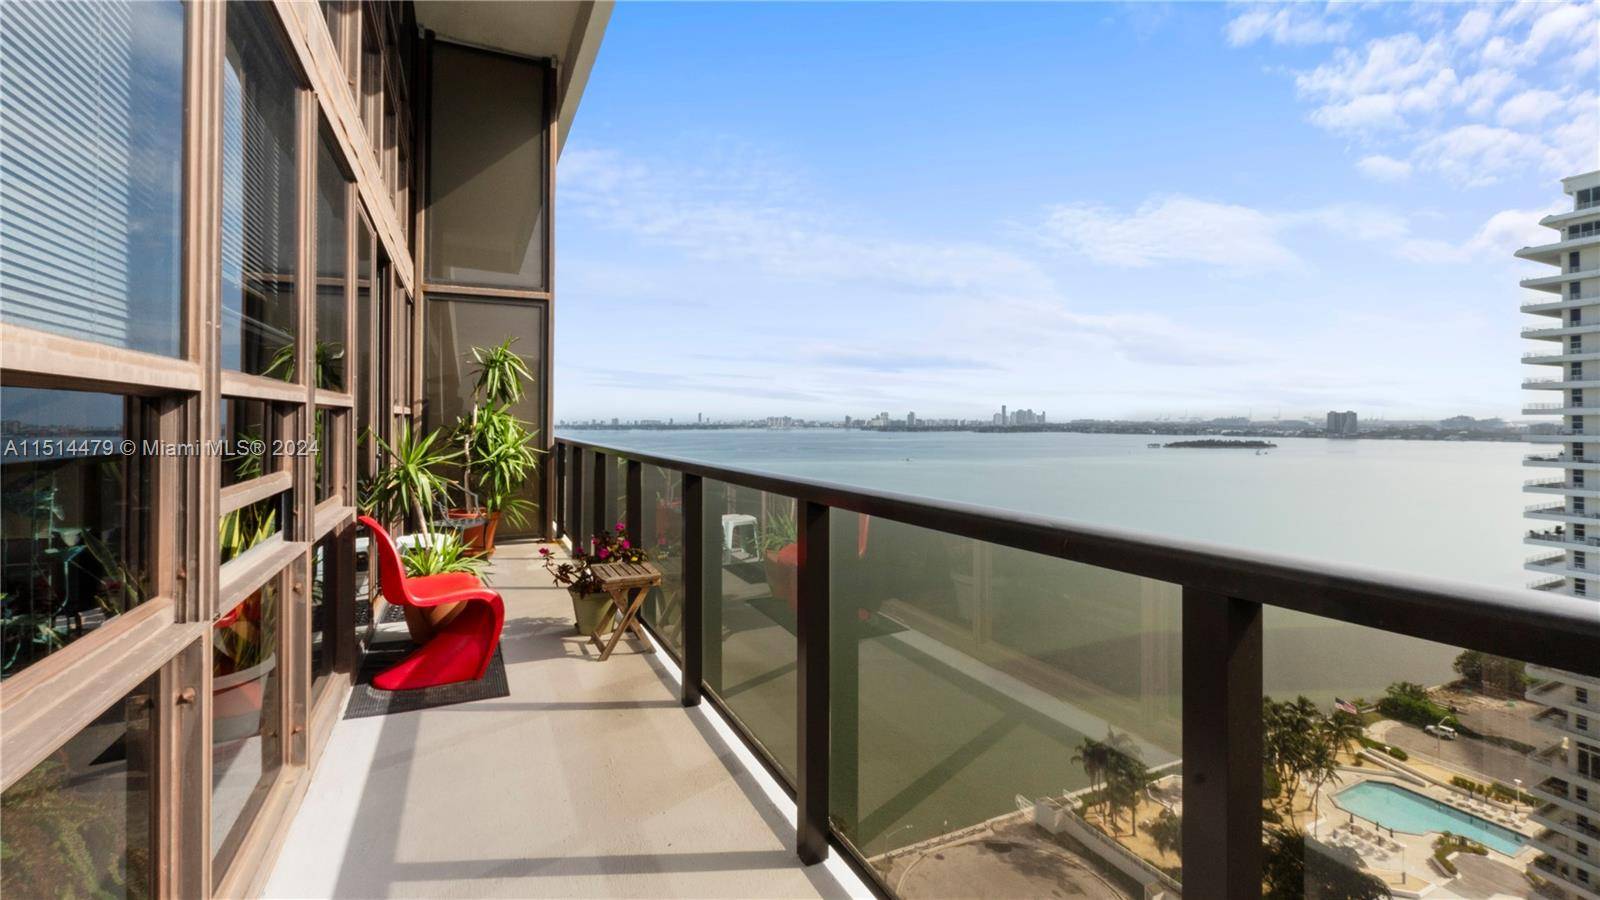 Stunning 2 story penthouse unit with breathtaking bay and city views !